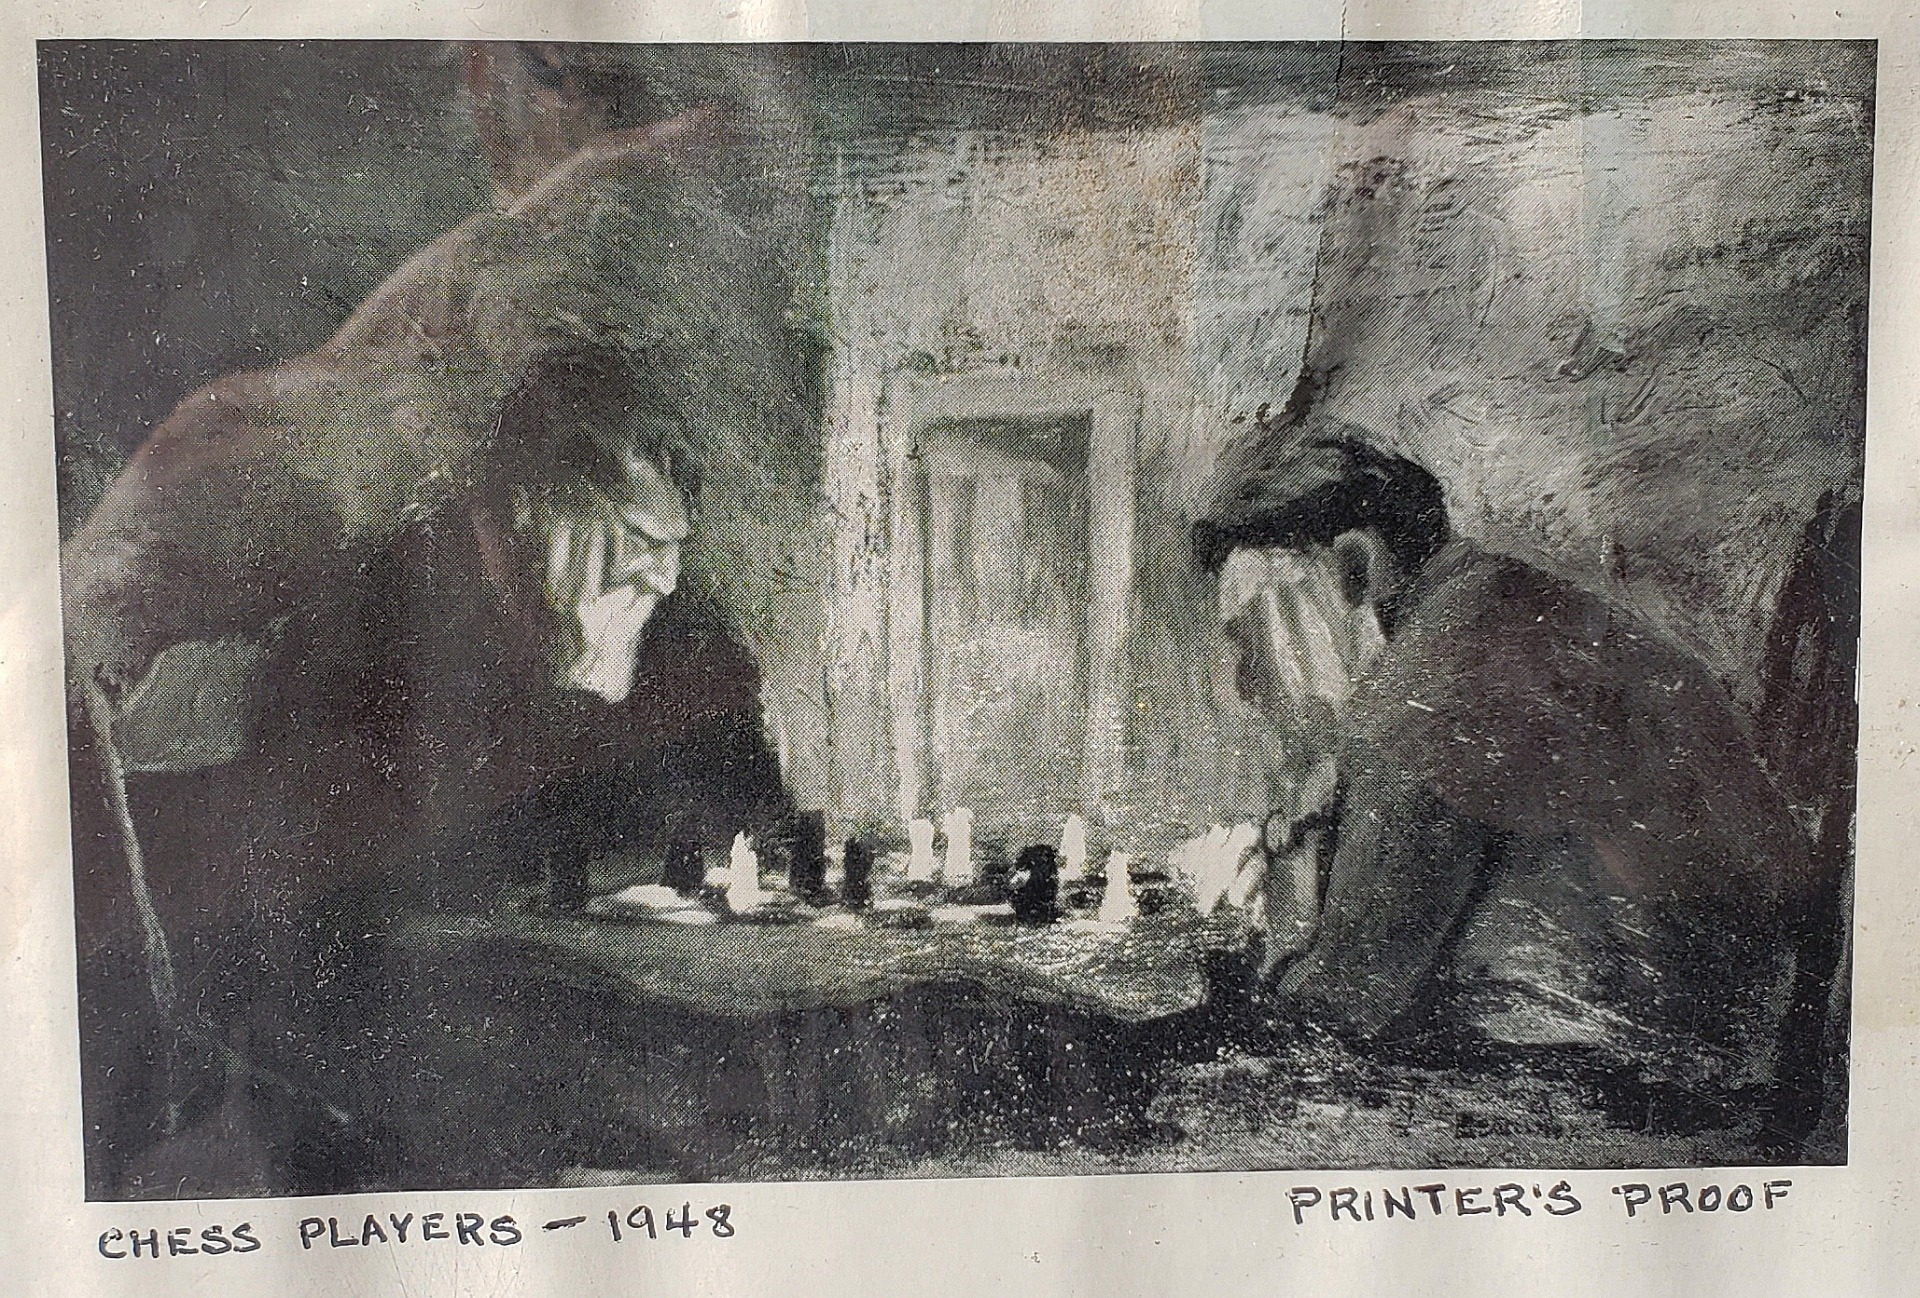 Print of painting by Boschka of two men playing chess